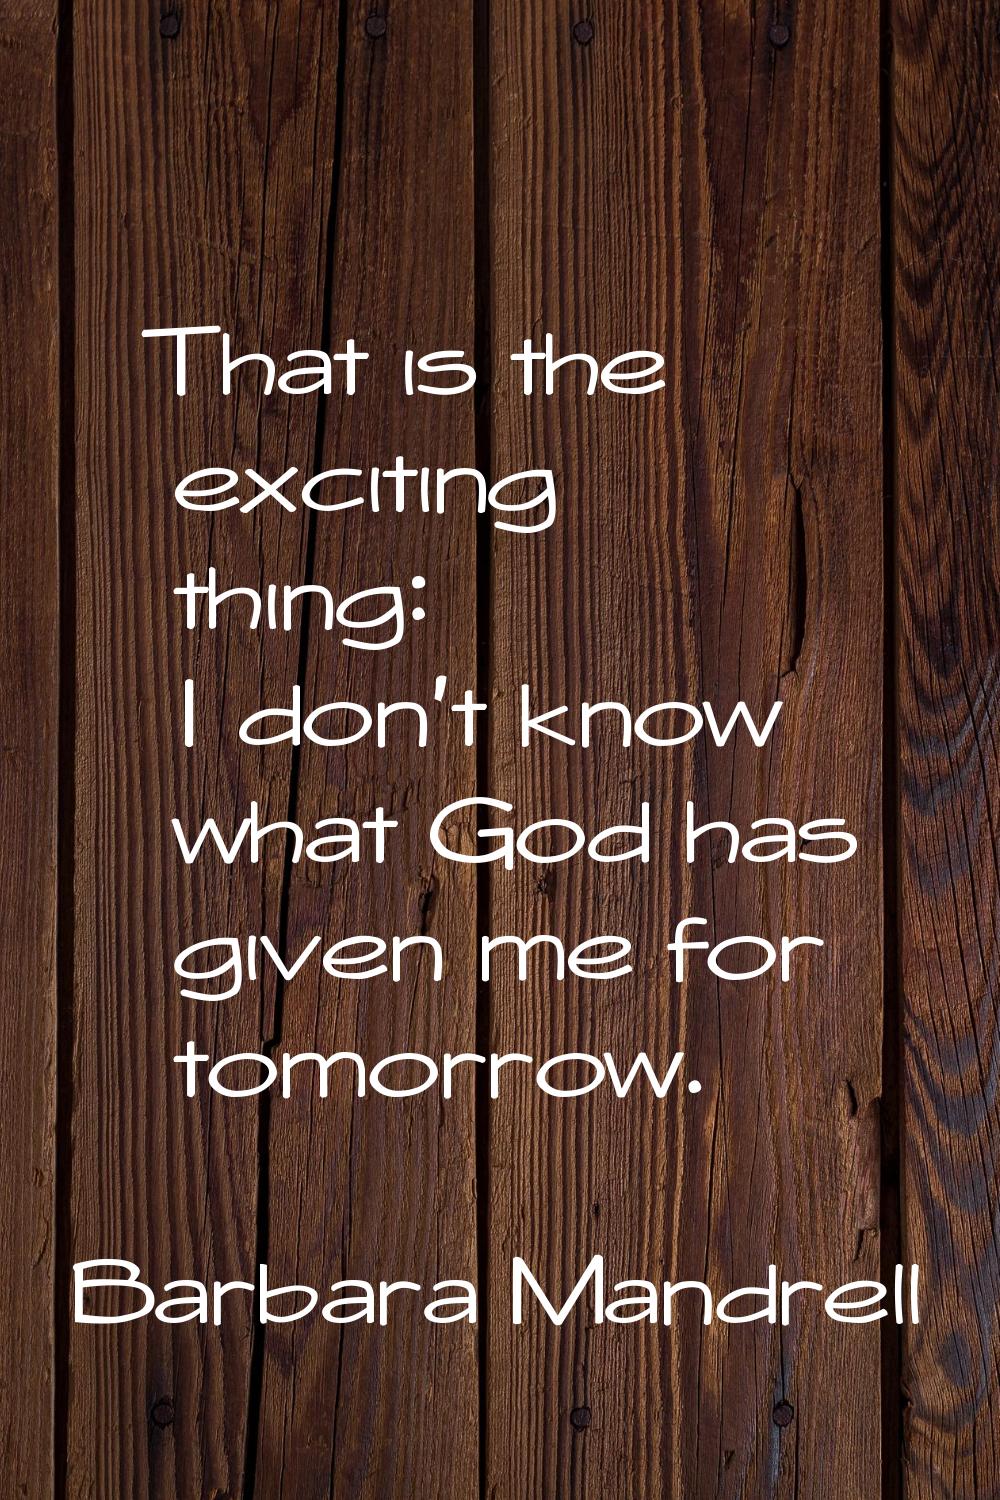 That is the exciting thing: I don't know what God has given me for tomorrow.